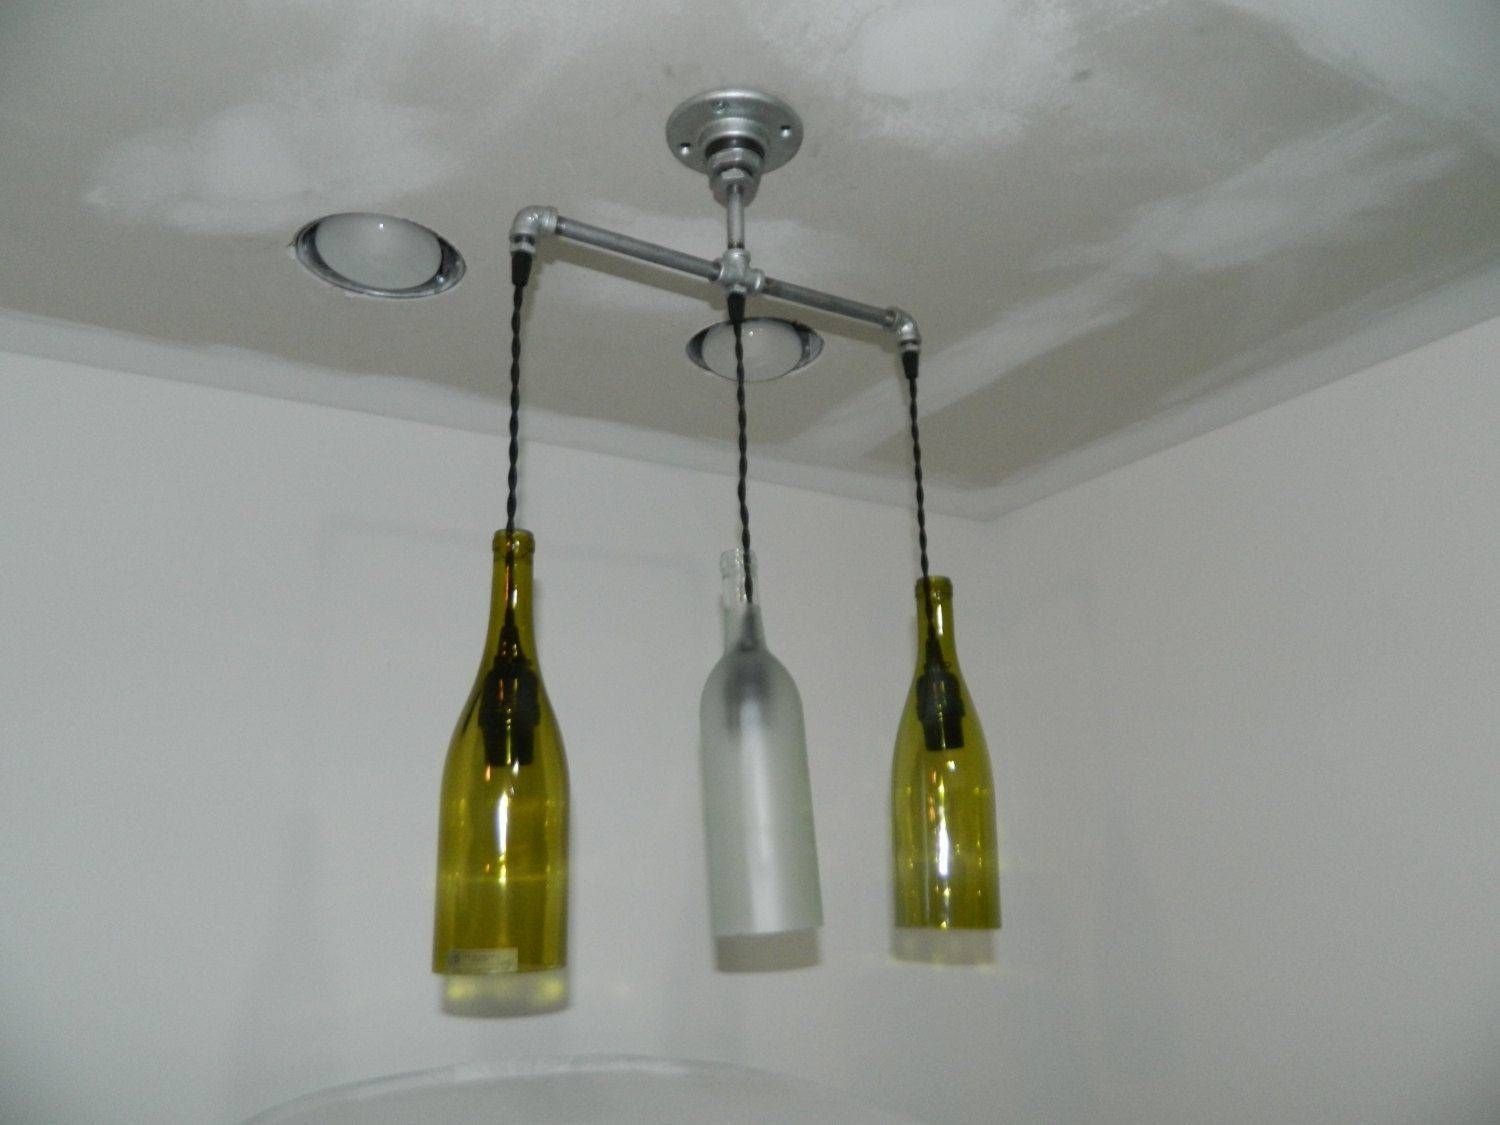 Awesome Wine Bottle Pendant Light Home Interior Design Bottle And Throughout Wine Bottle Ceiling Lights (Photo 15 of 15)